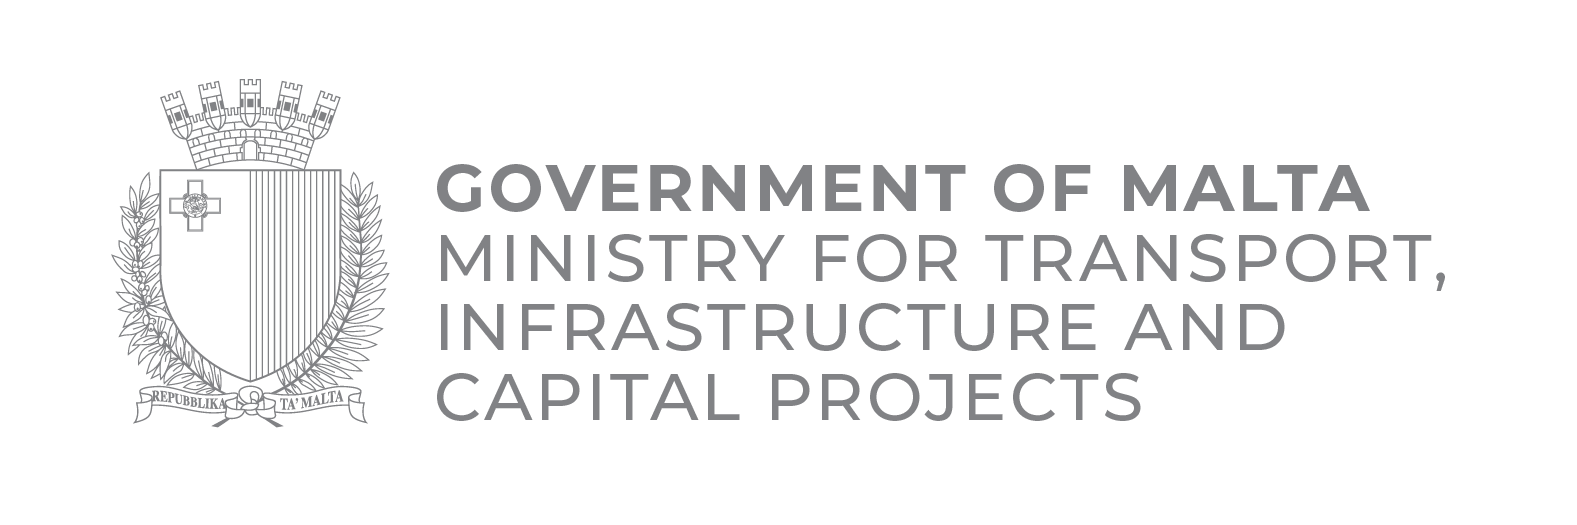 Ministry for Transport Infrastructure and Capital Projects